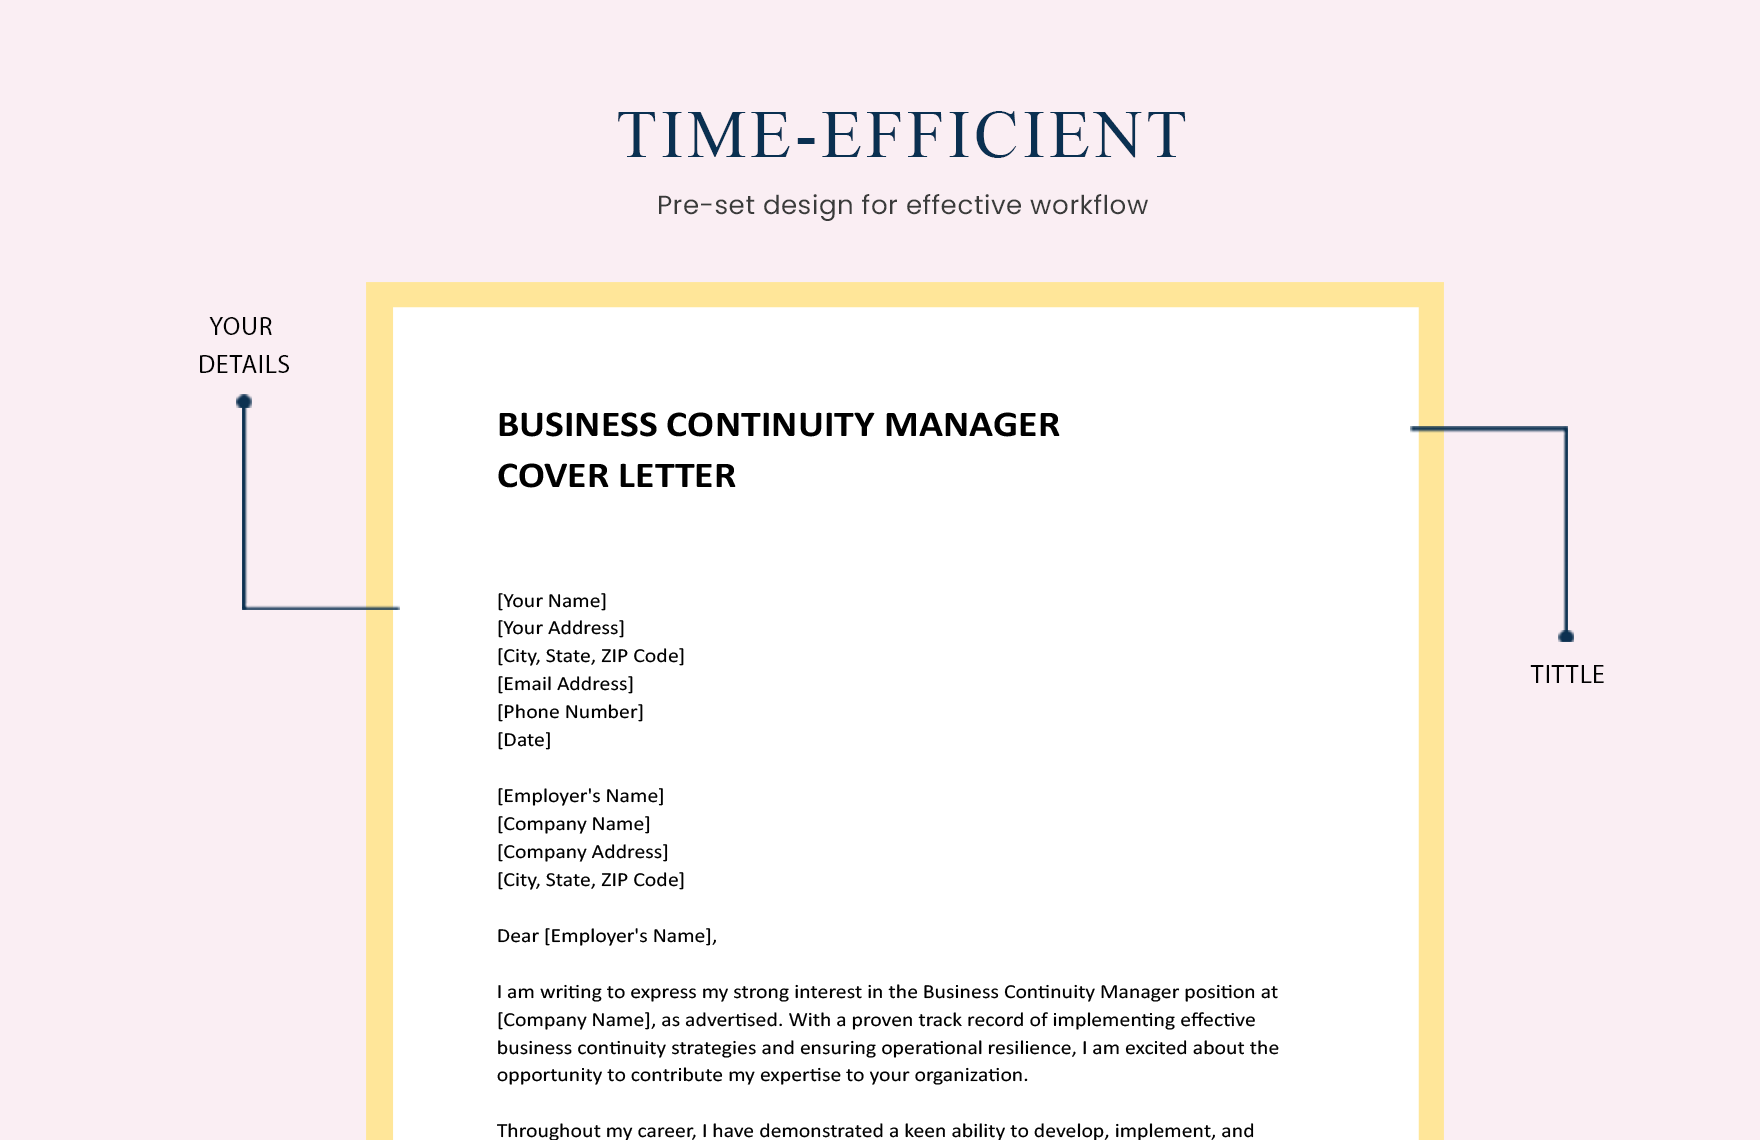 Business Continuity Manager Cover Letter